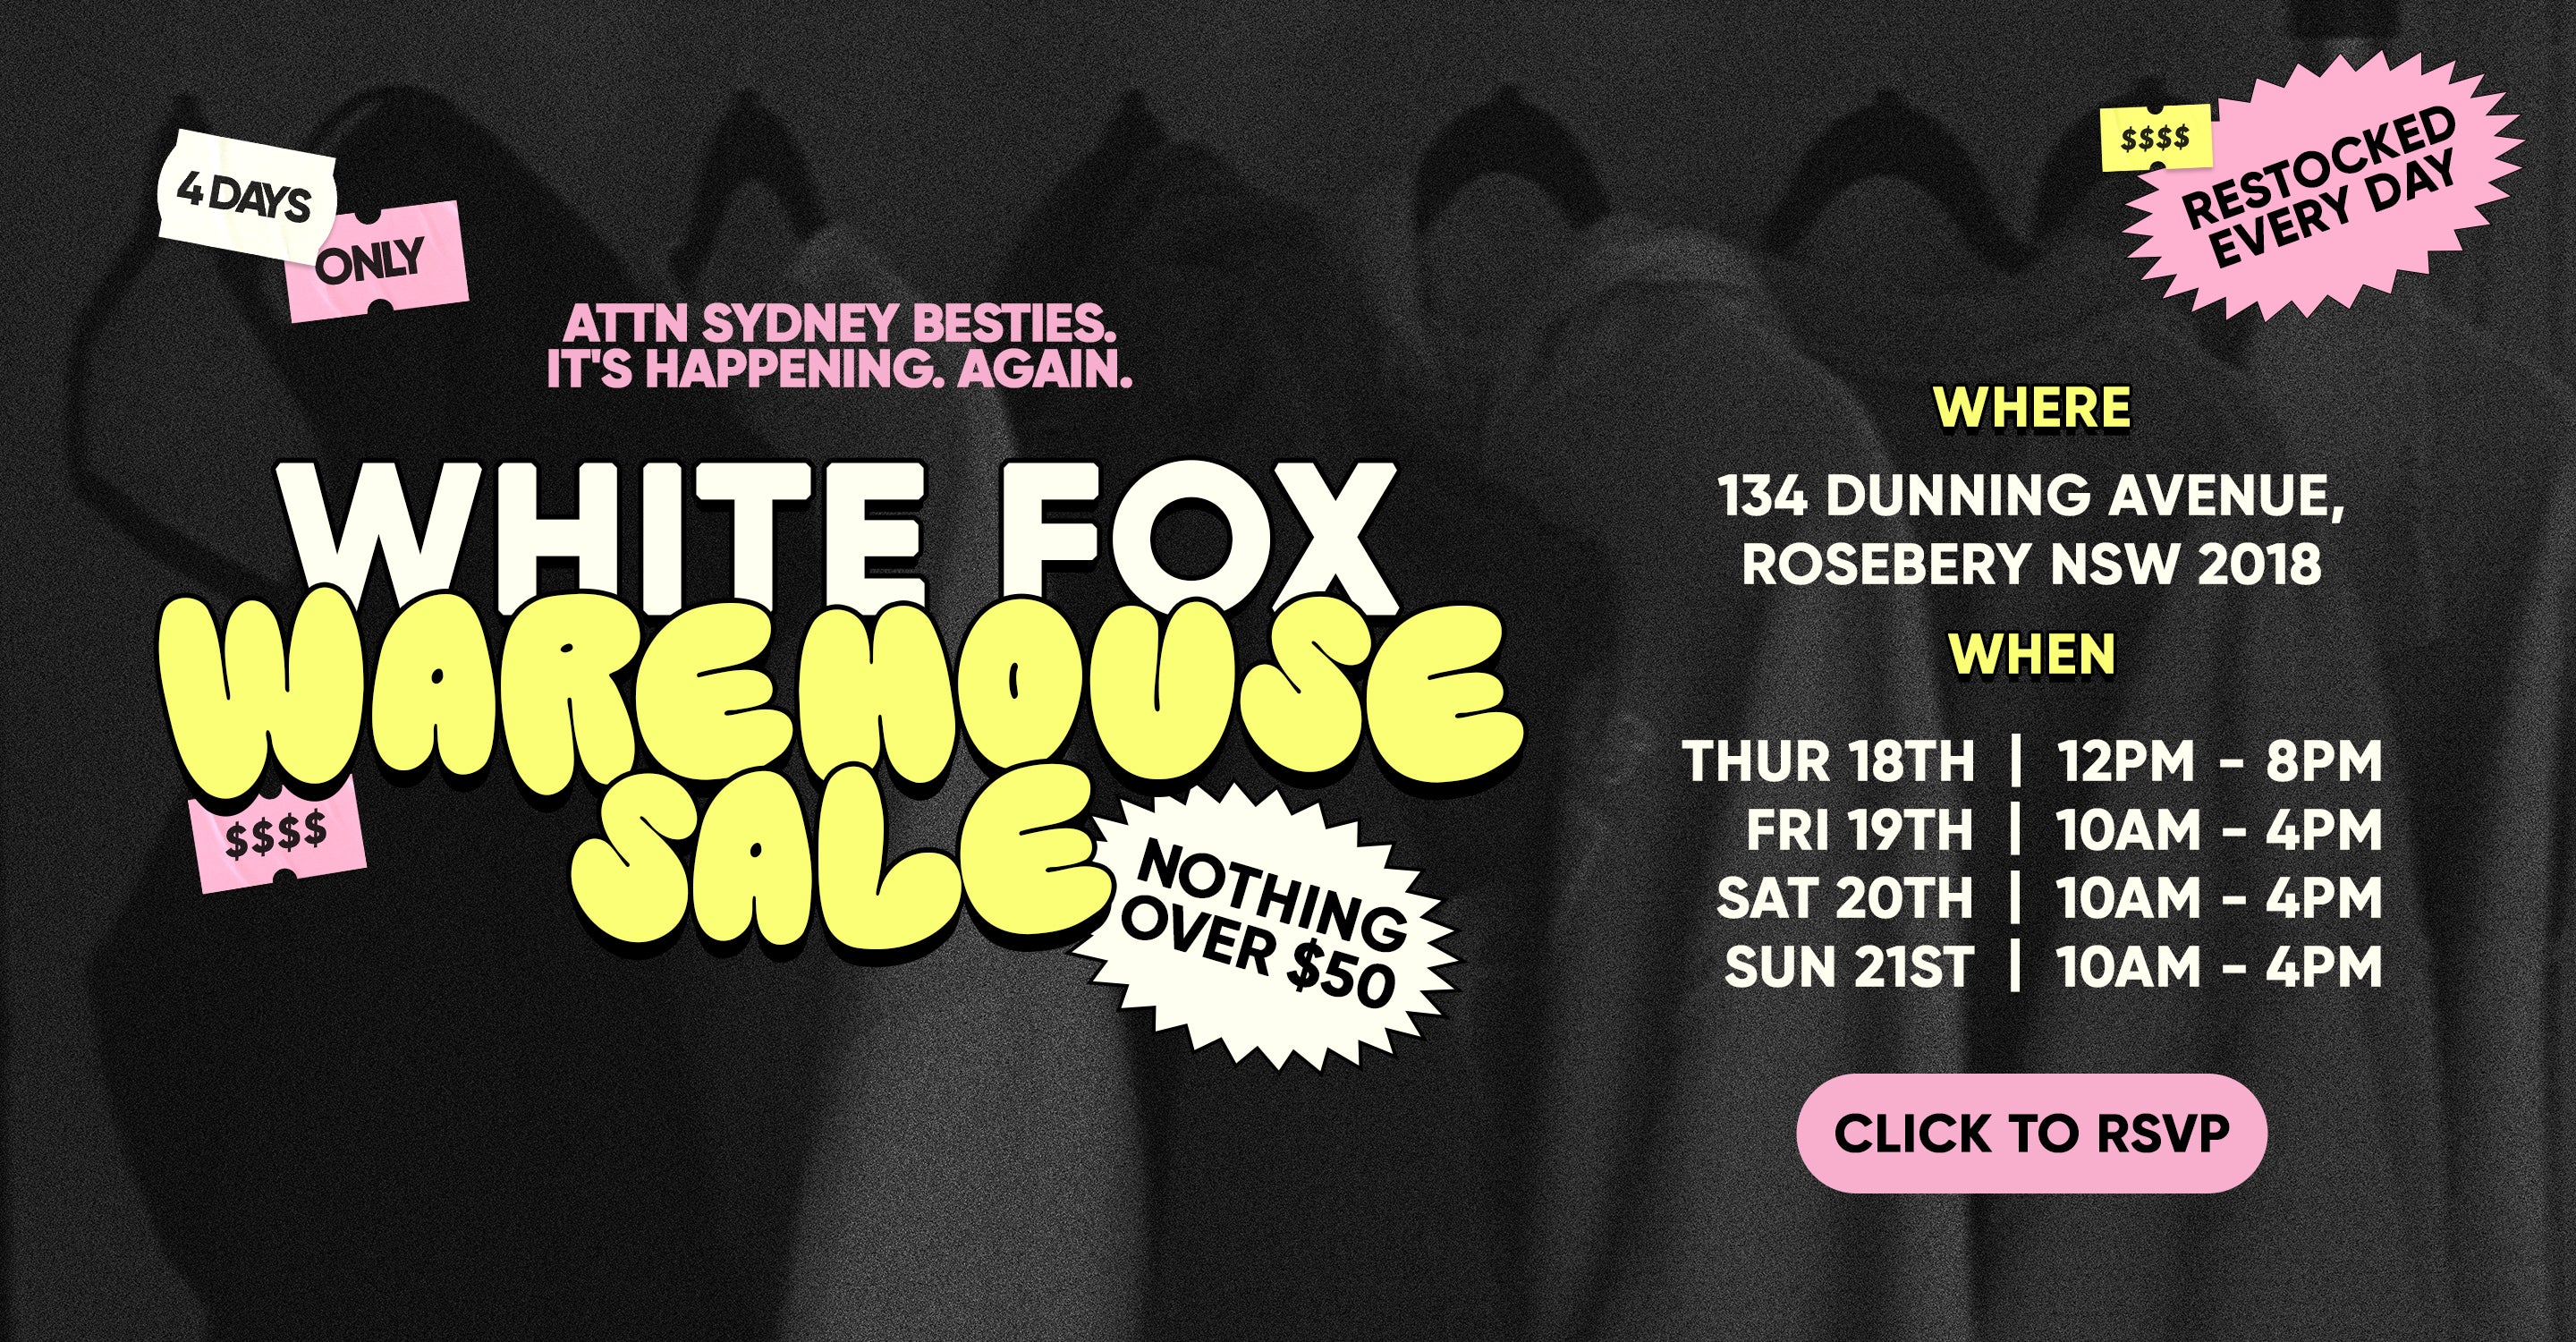 White Fox Warehouse Sale on soon! 4 days only. Nothing over $50. Where? 134 Dunning Ave, Rosebery, NSW 2018. When? Thursday the 18th: 12PM-8PM. Friday 19th to Sunday 21st: 10AM - 4PM. Click to RSVP!